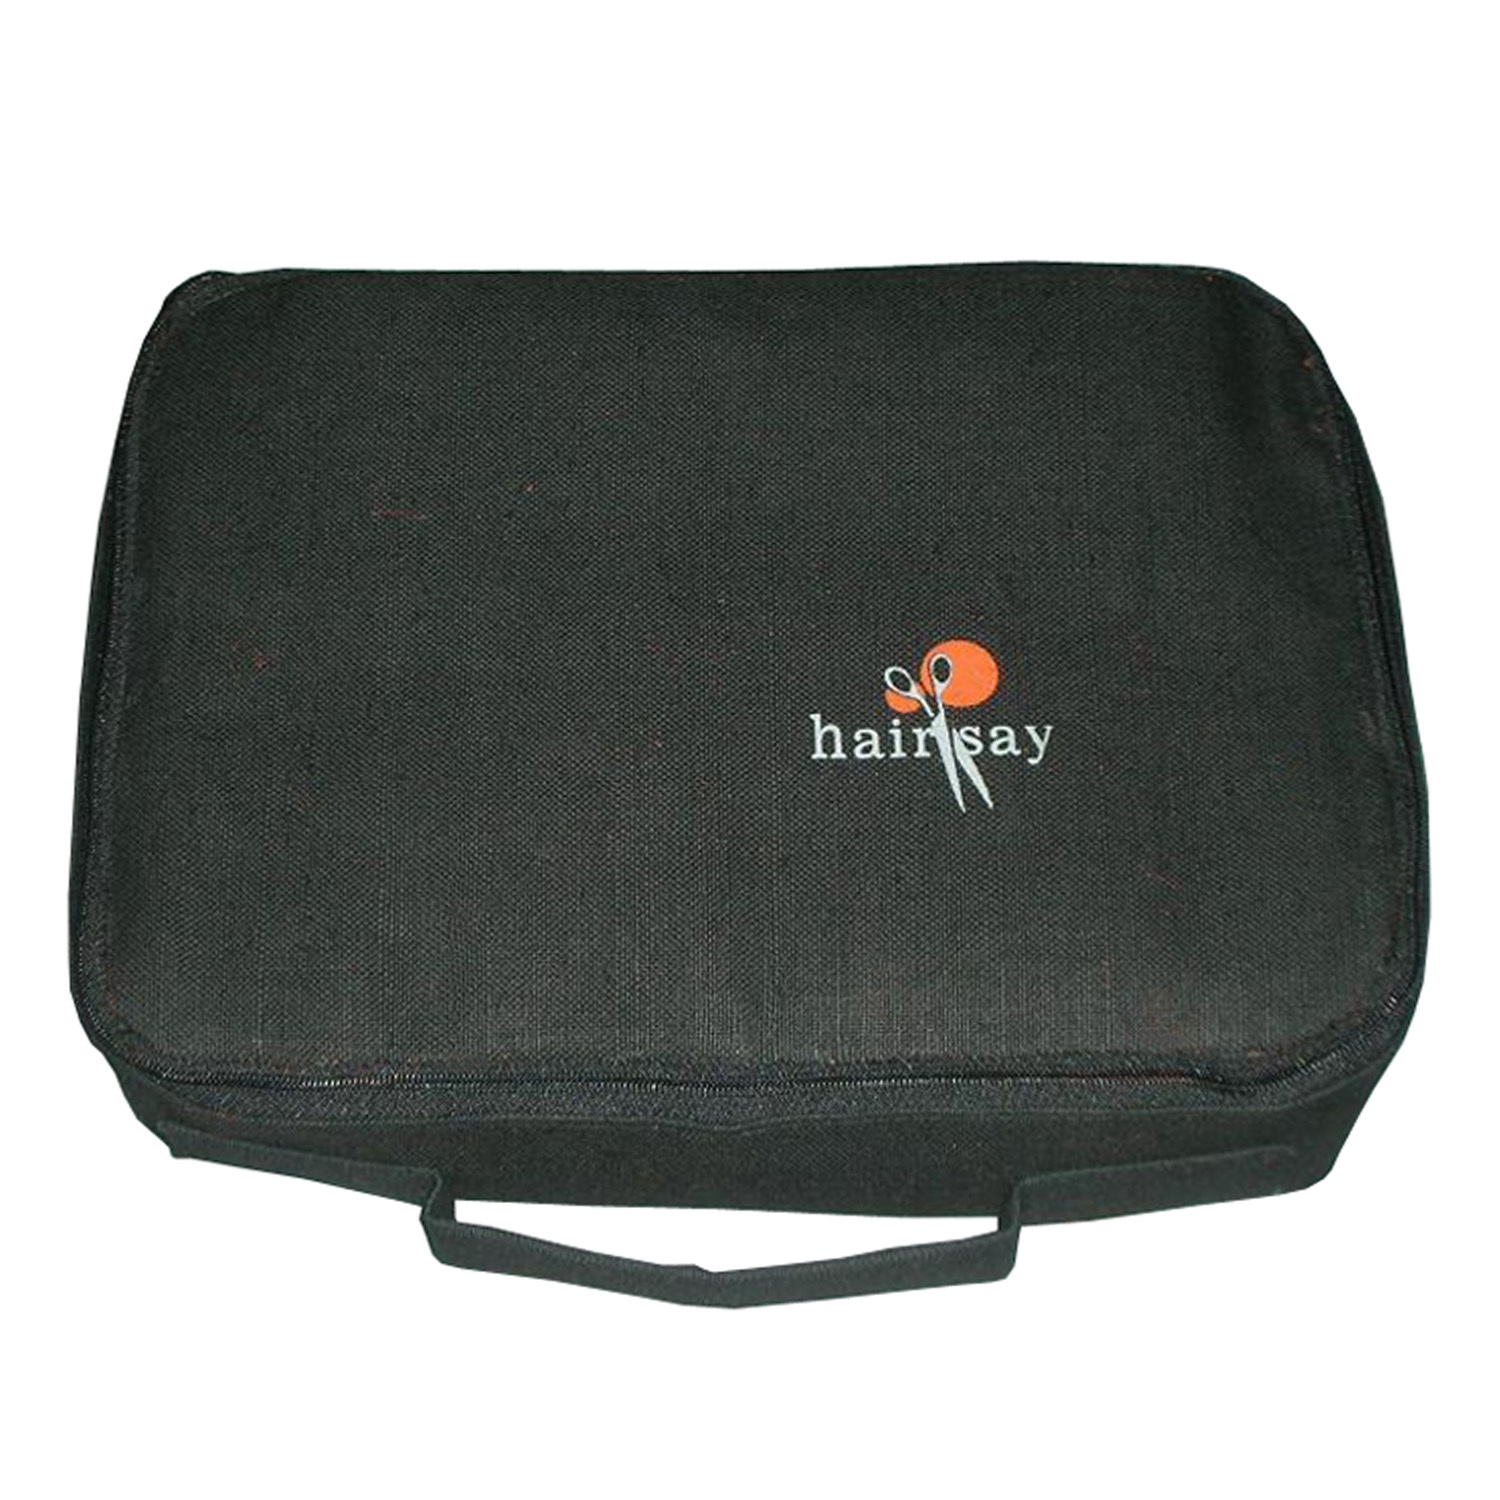 Juco Promotional Travel Kit Bag With Polysilk Lining